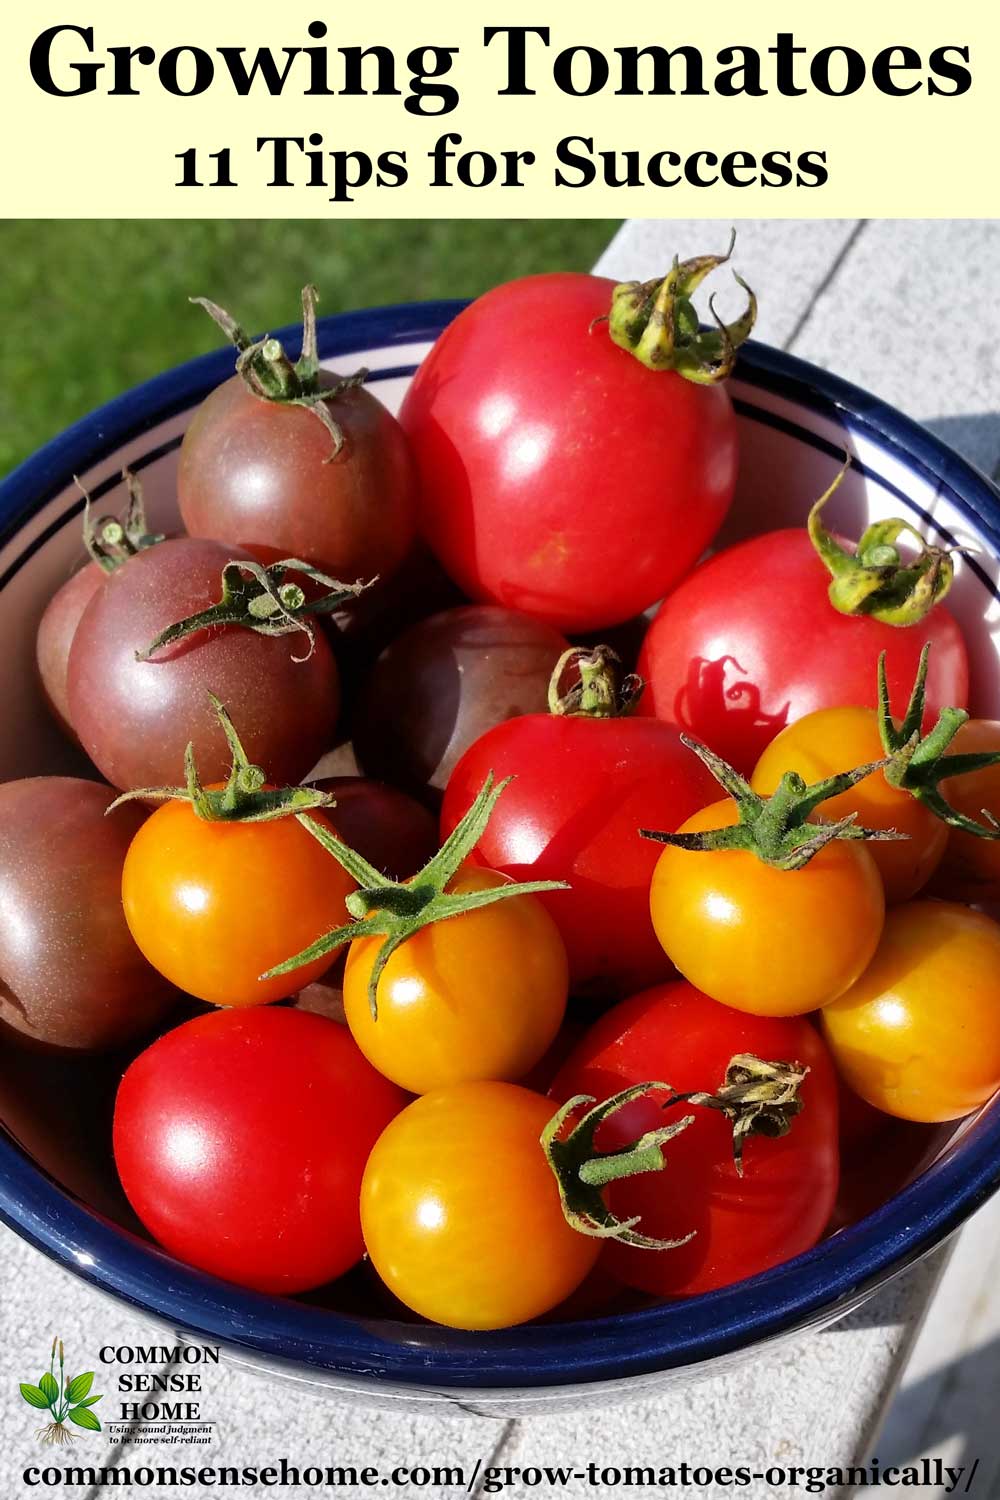 Text "Growing Tomatoes - 11 Tips for Success" above bowl of tomatoes